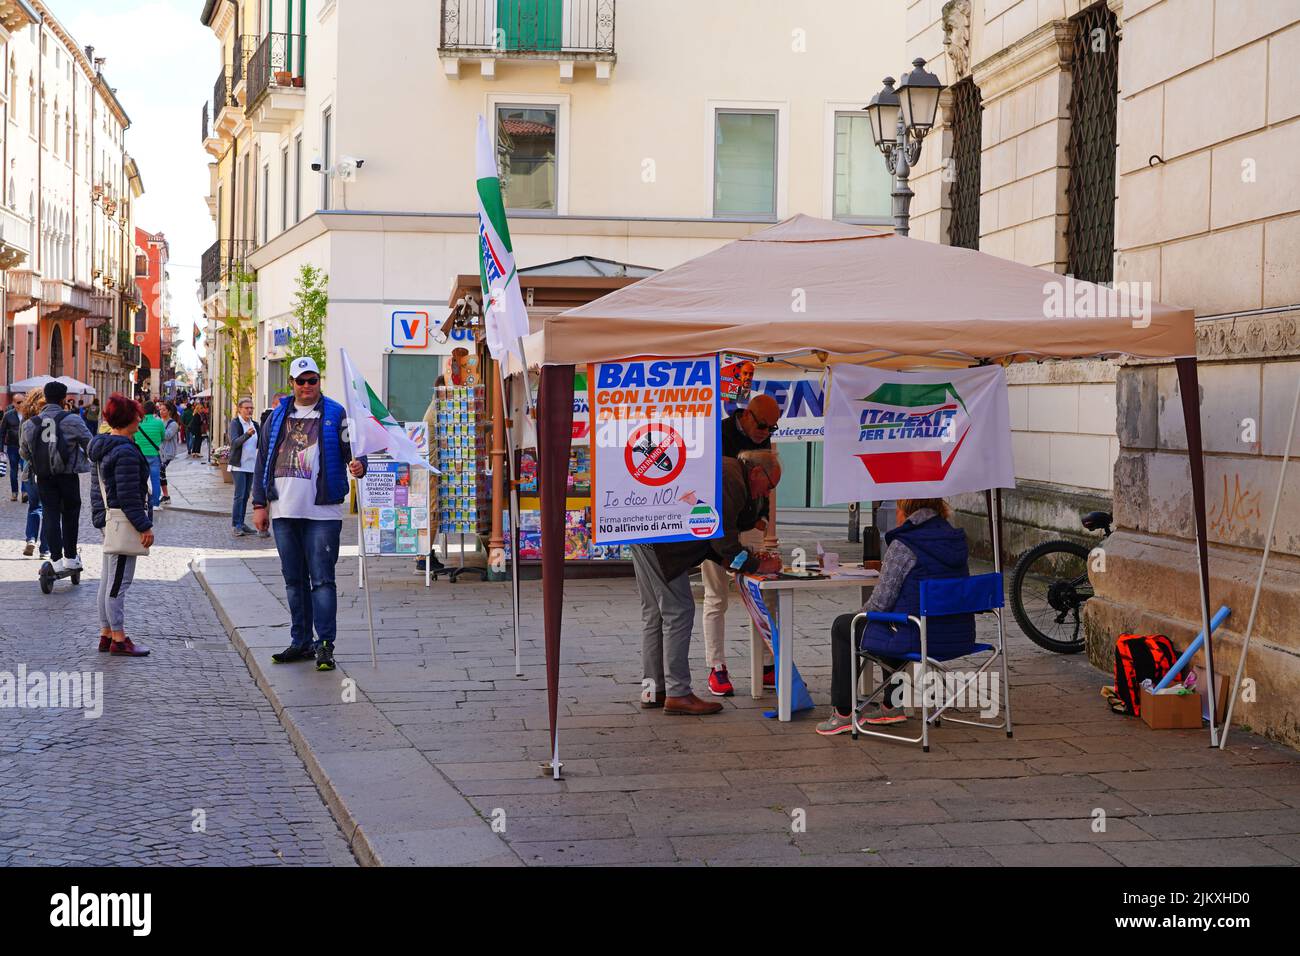 VICENZA, ITALY -16 APR 2022- View of supporters of the Italexit For Italy with Paragone political party, a Eurosceptic far right political party in It Stock Photo